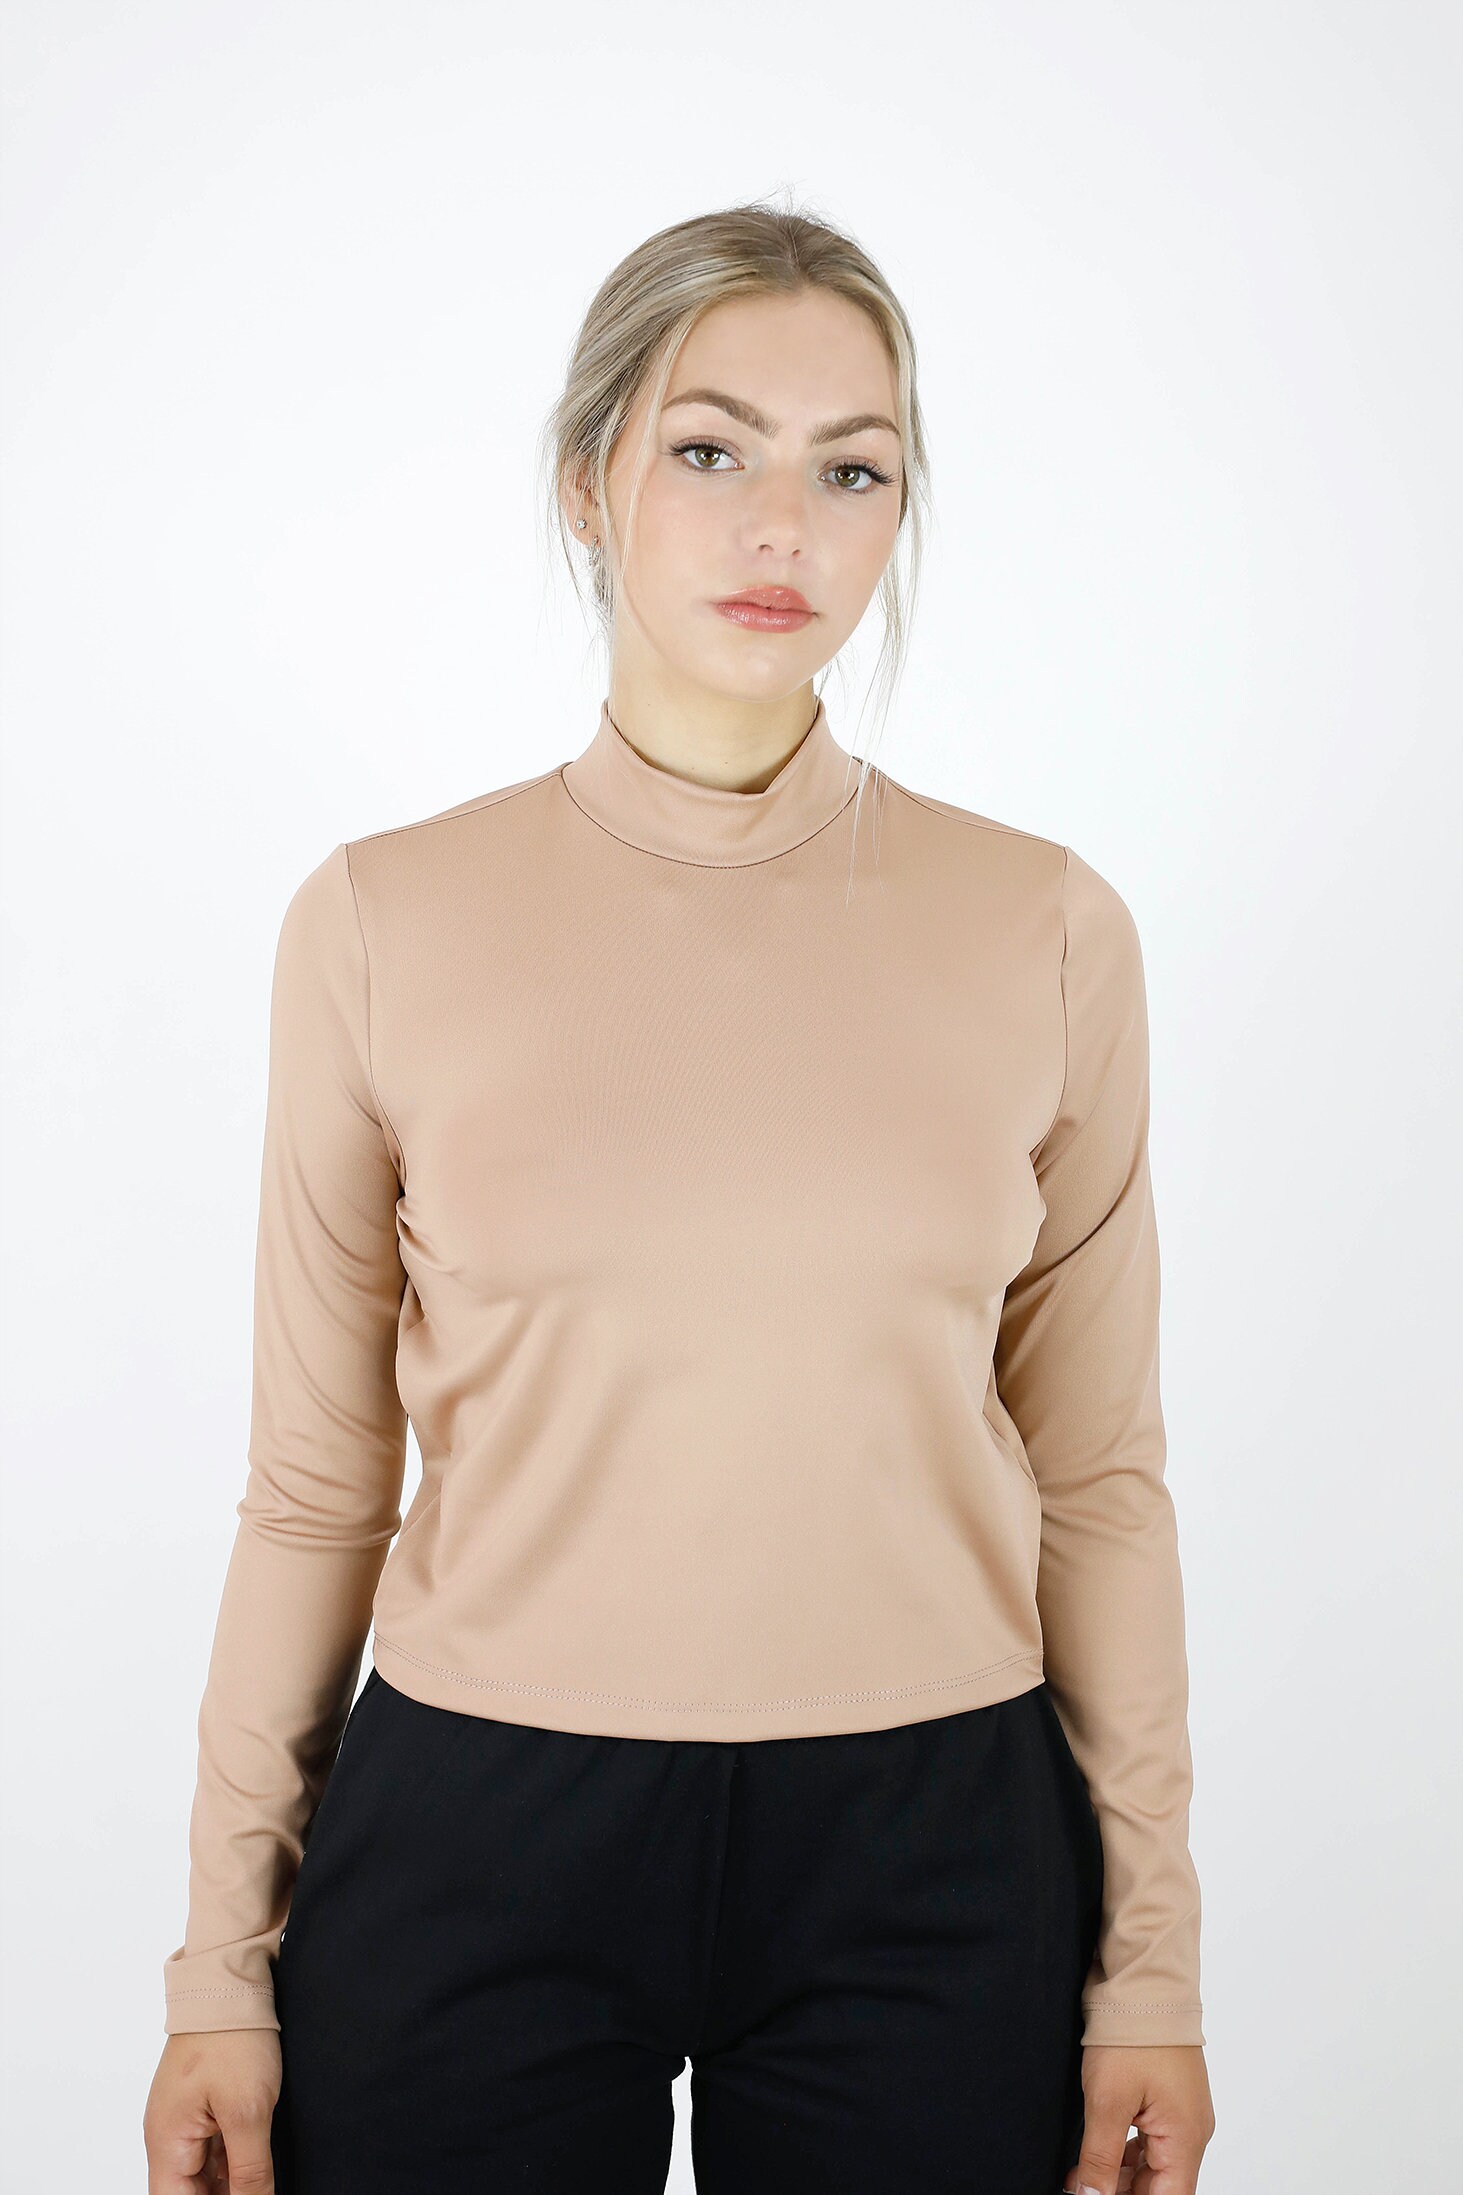 Rayon Spandex Tops for Women, Long Sleeve Slim Fit Lightweight